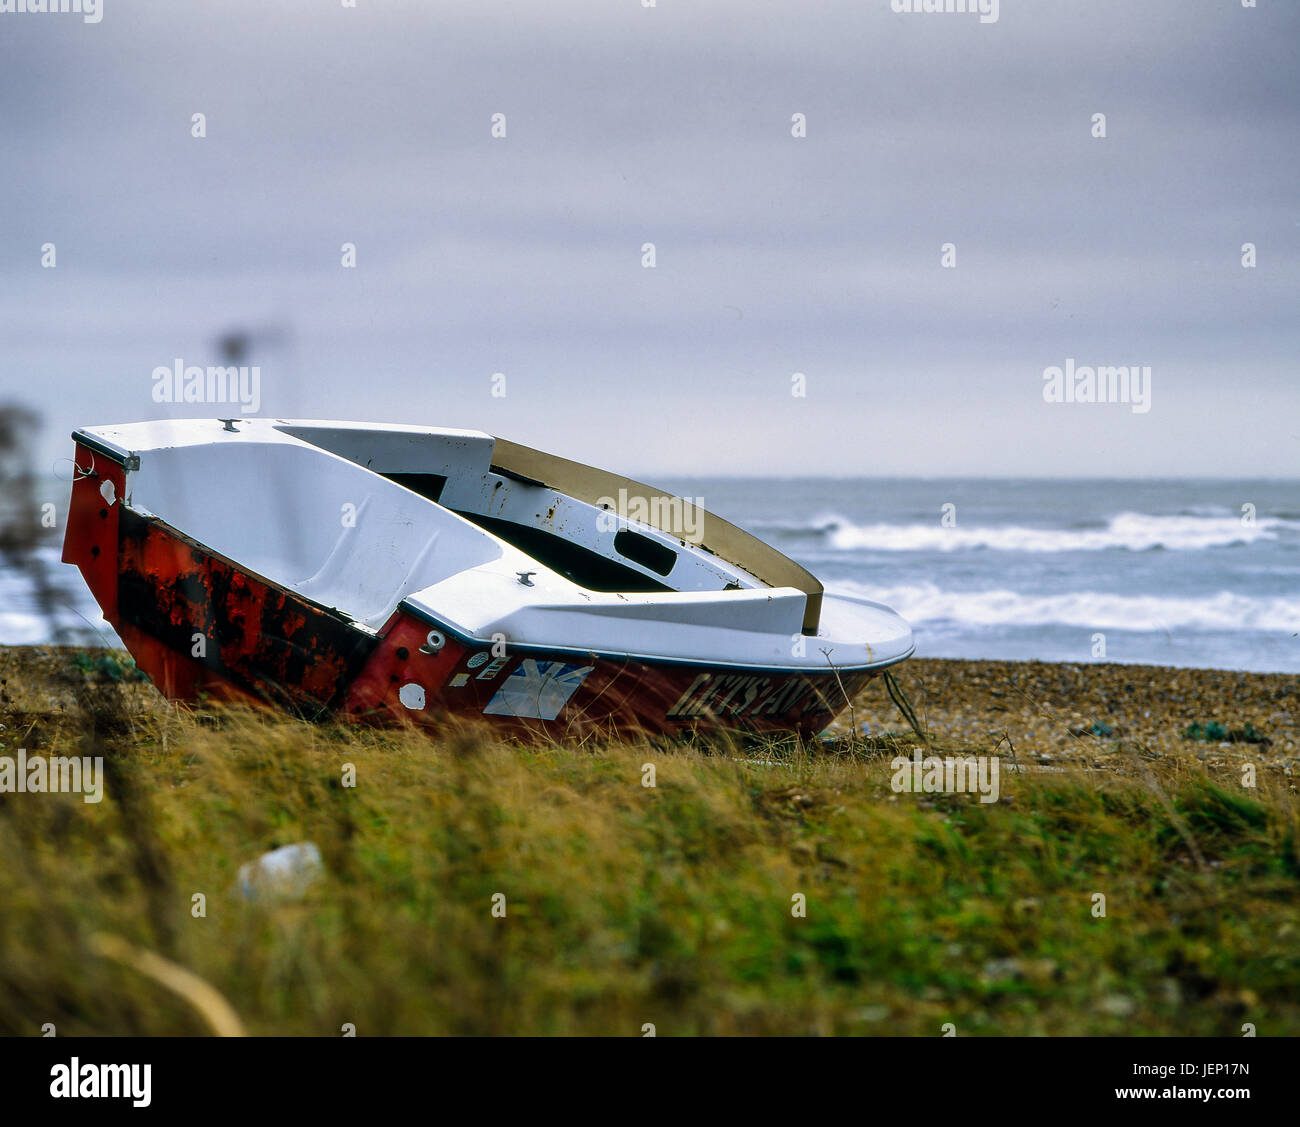 Boat left abandoned on beach, photographed with a Mamiya Rb67 film camera and some Fuji Velvia 50 120 film Stock Photo